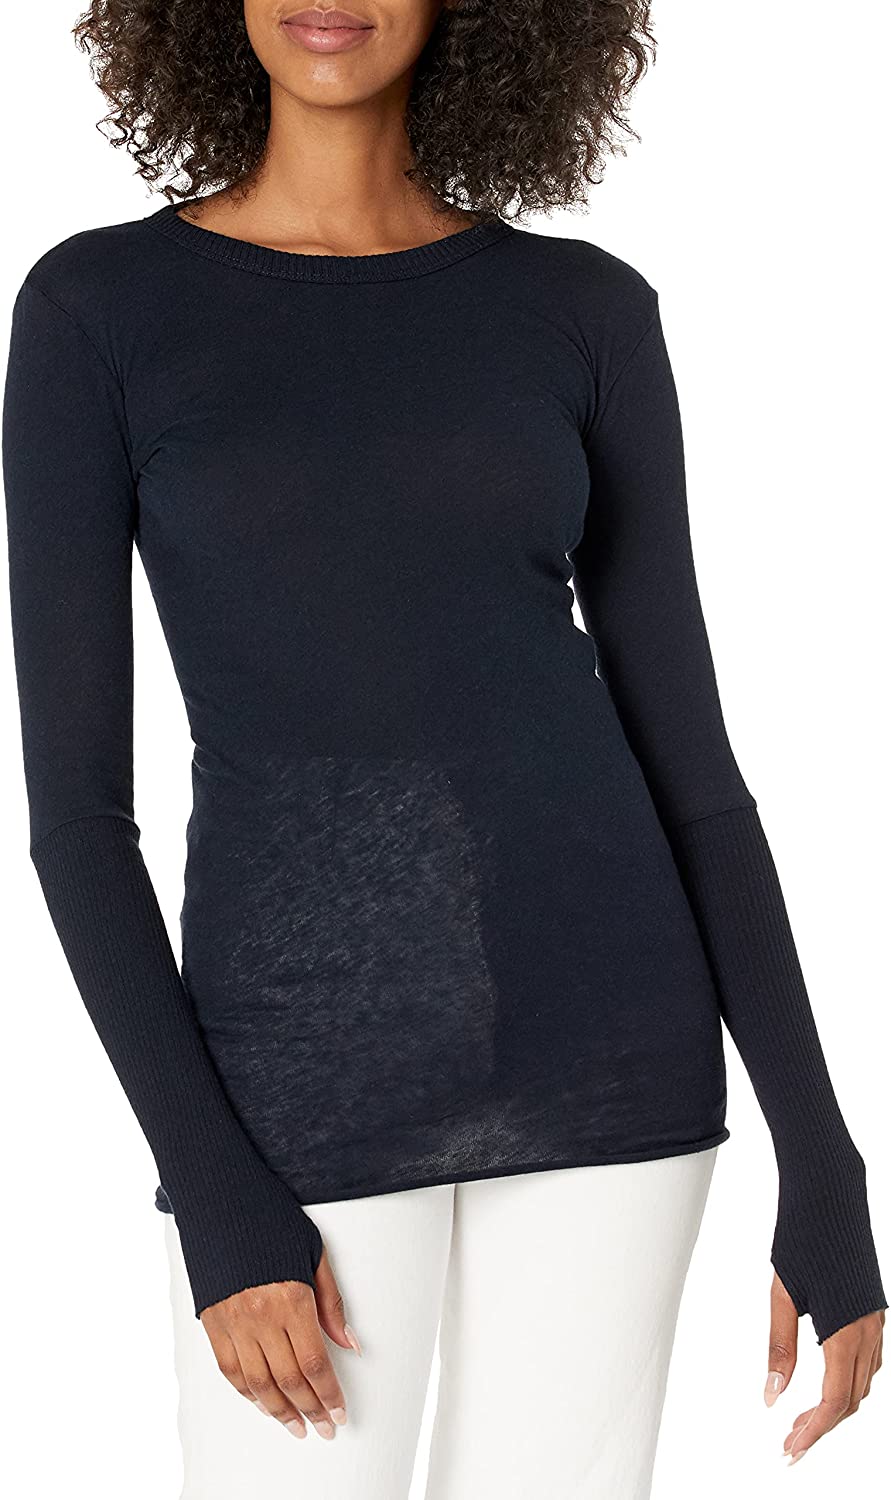 Grey X-Small Enza Costa Womens Heathered Thermal Blouse 